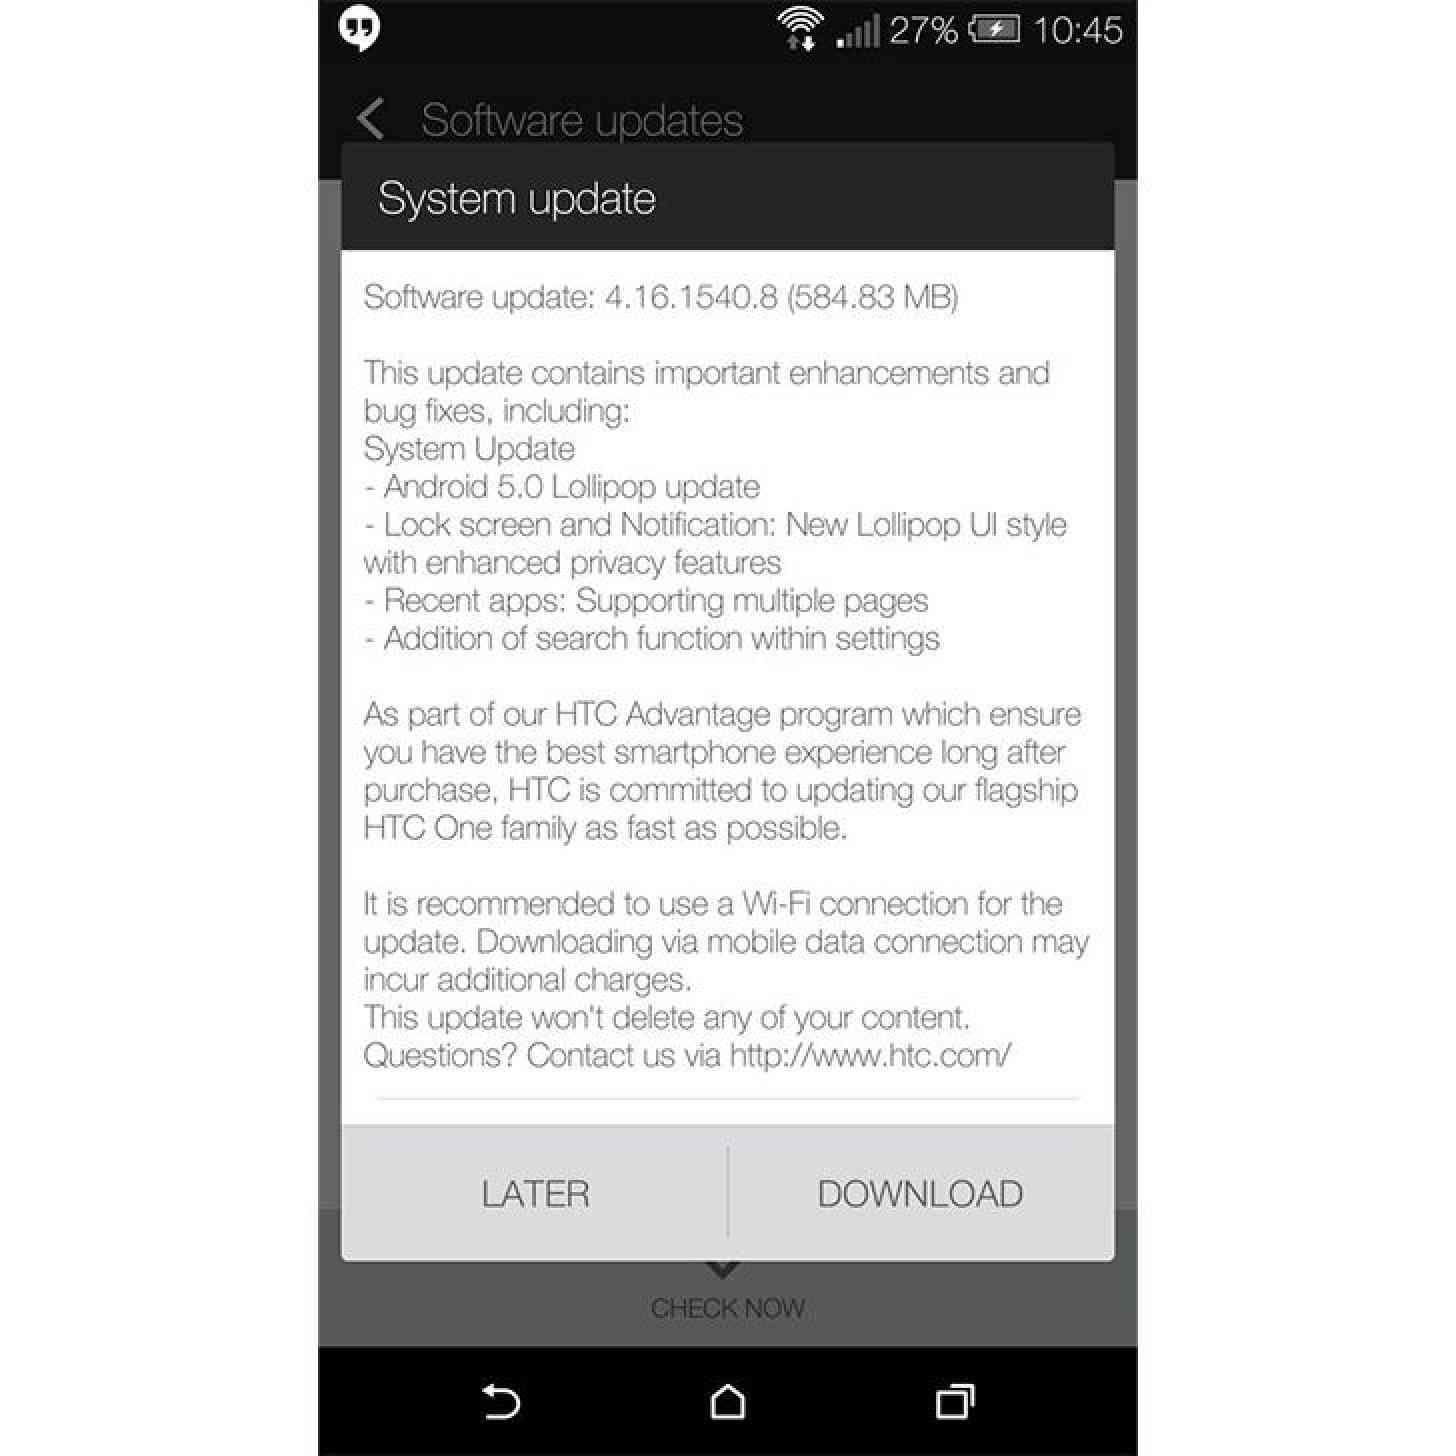 HTC One M8 Android 5.0 Lollipop update